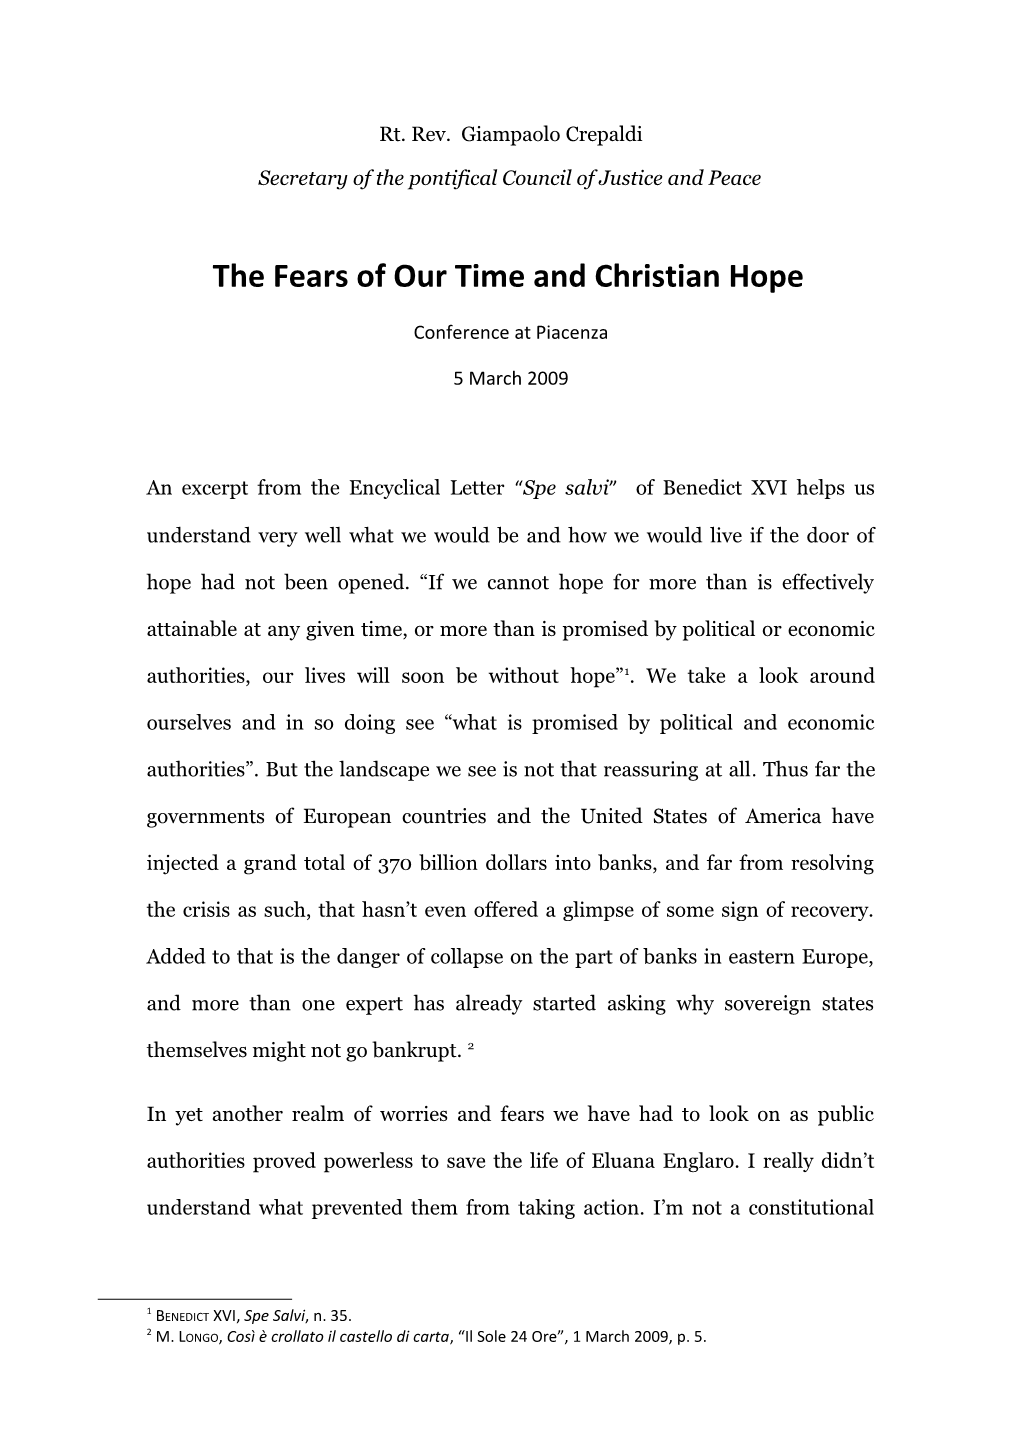 The Fears of Our Time and Christian Hope